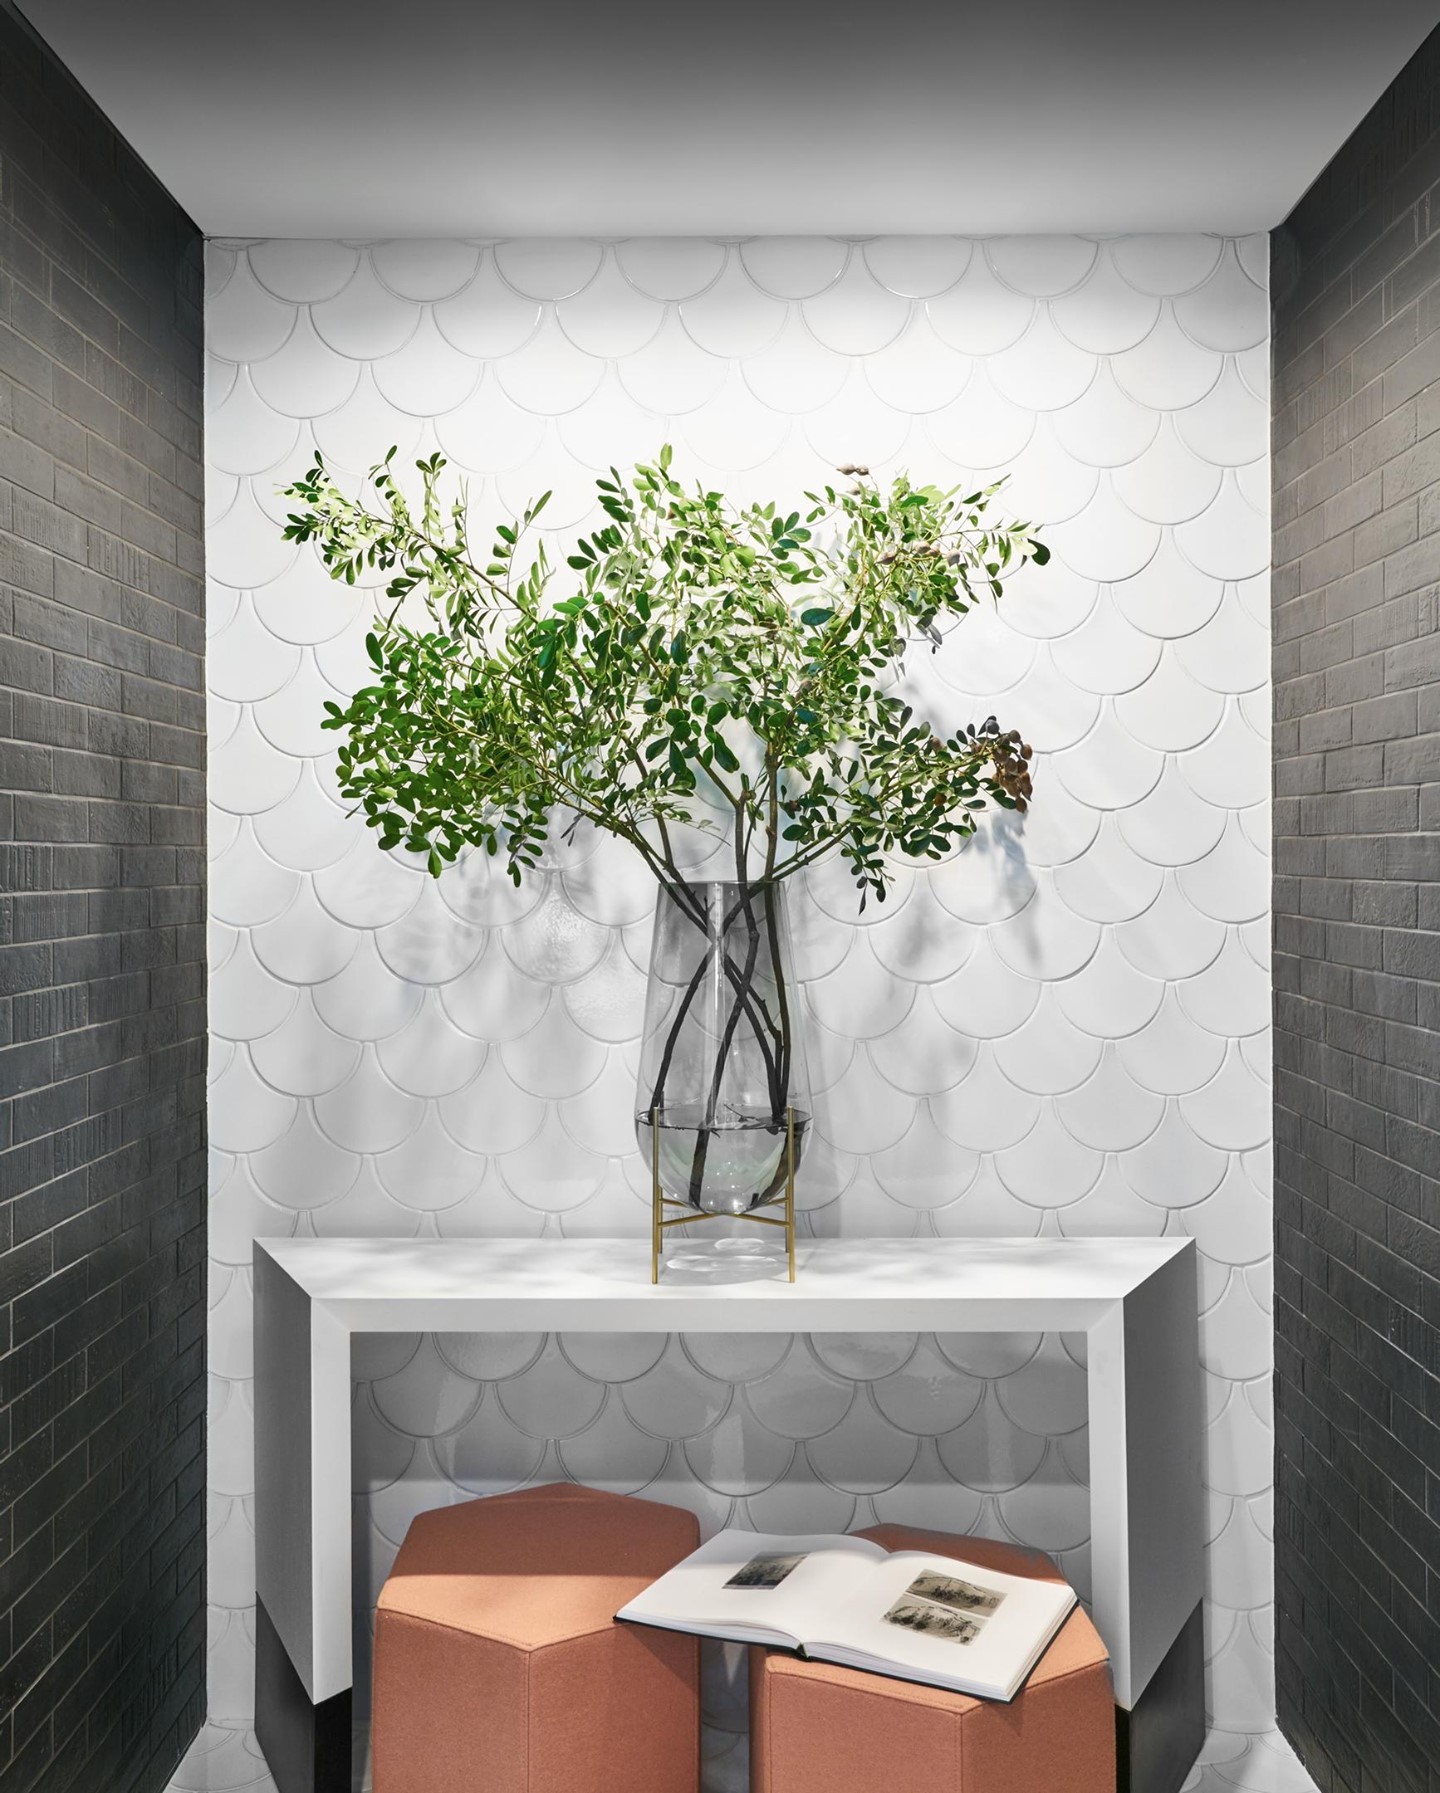 Complimentary textured walls really highlight an overlooked space.